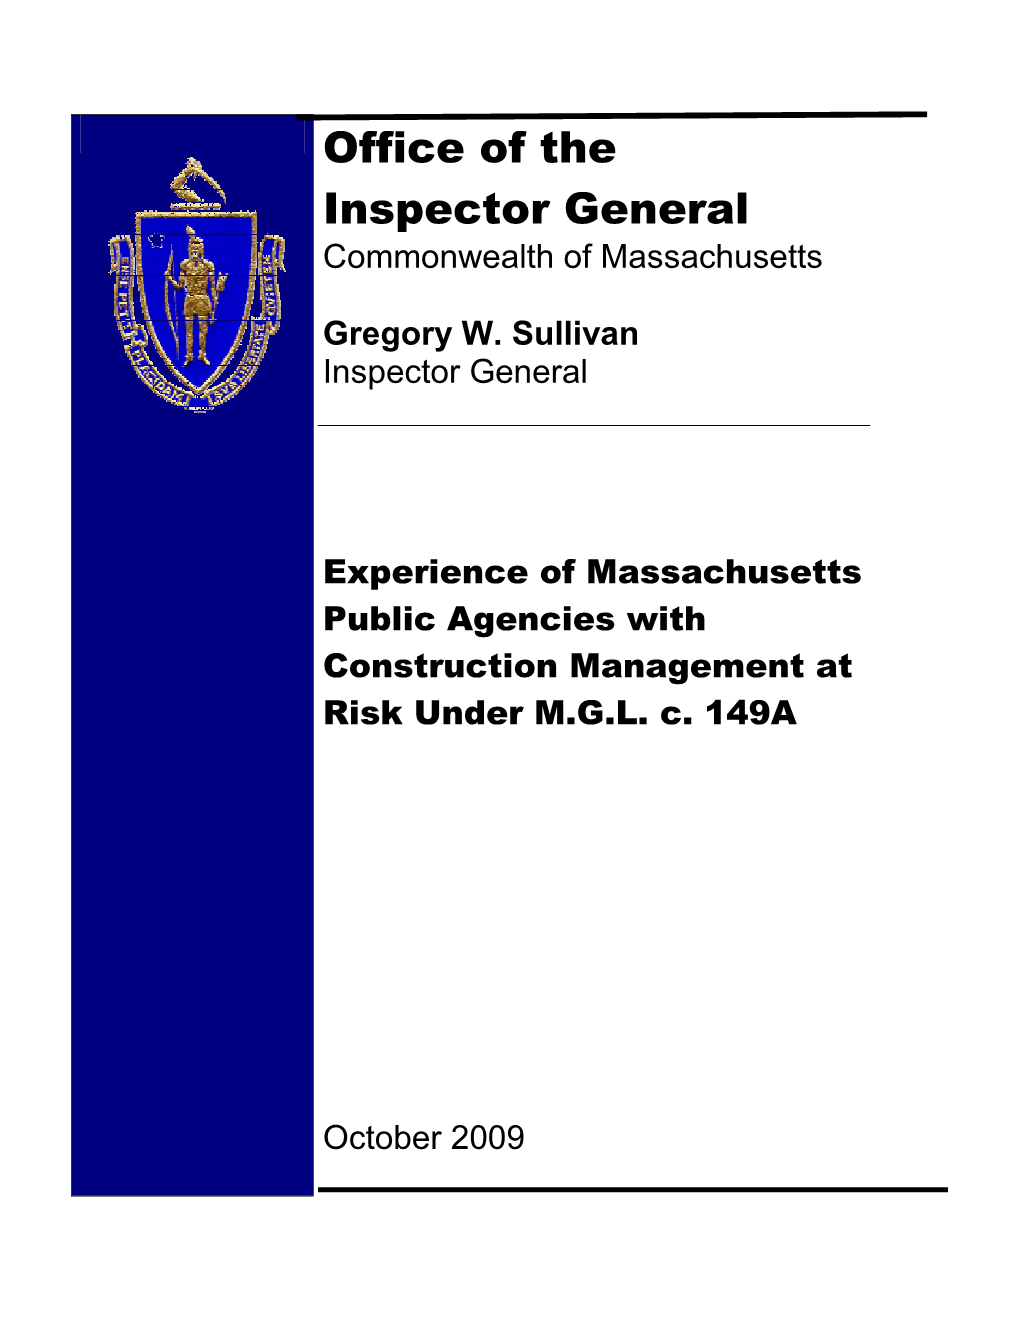 Open PDF File, 1.17 MB, for Experience of Massachusetts